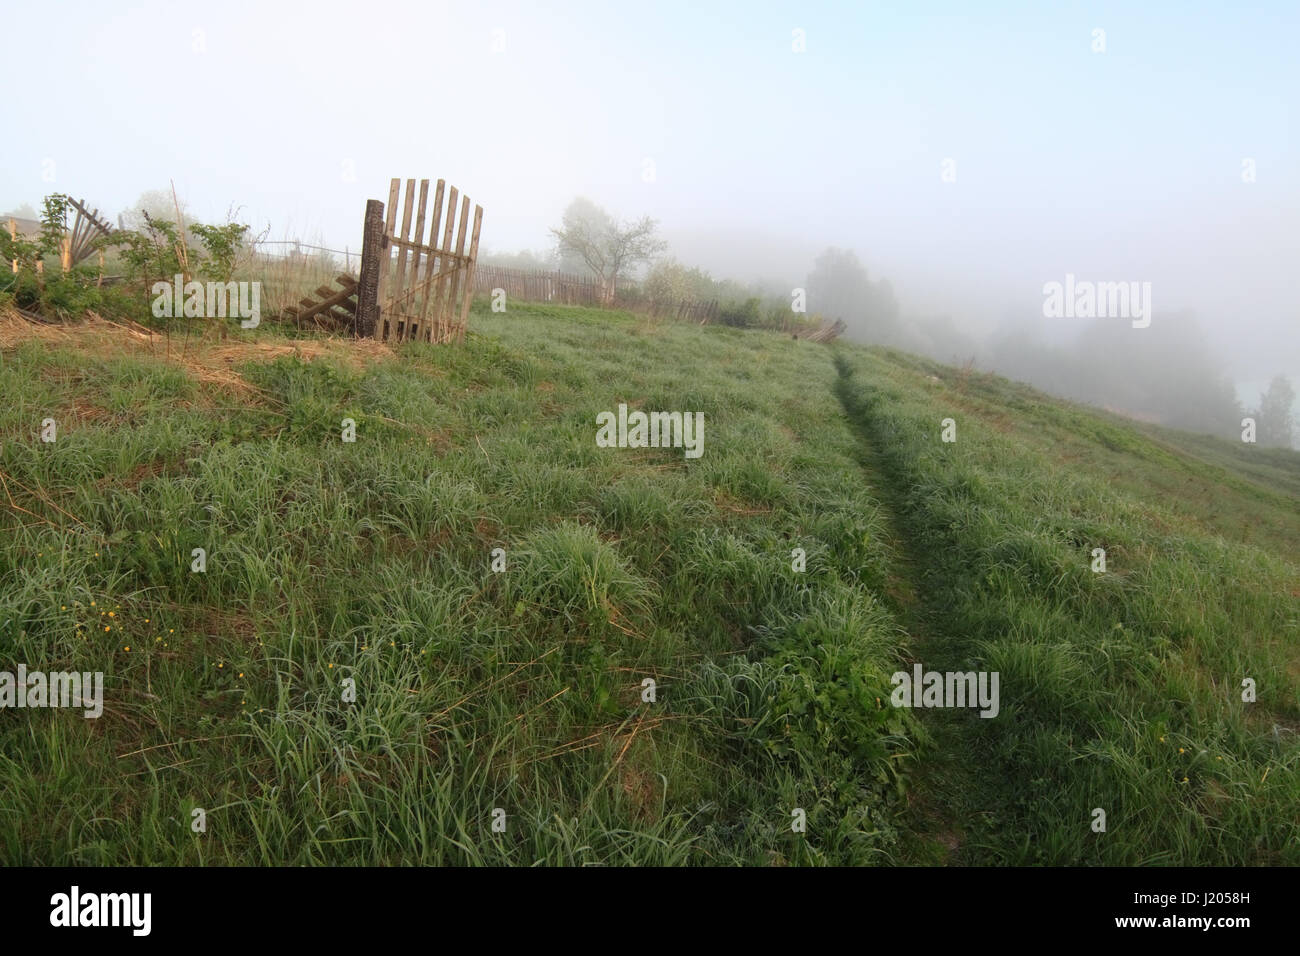 A scenic picture of rural landscape with broken wooden fence Stock Photo